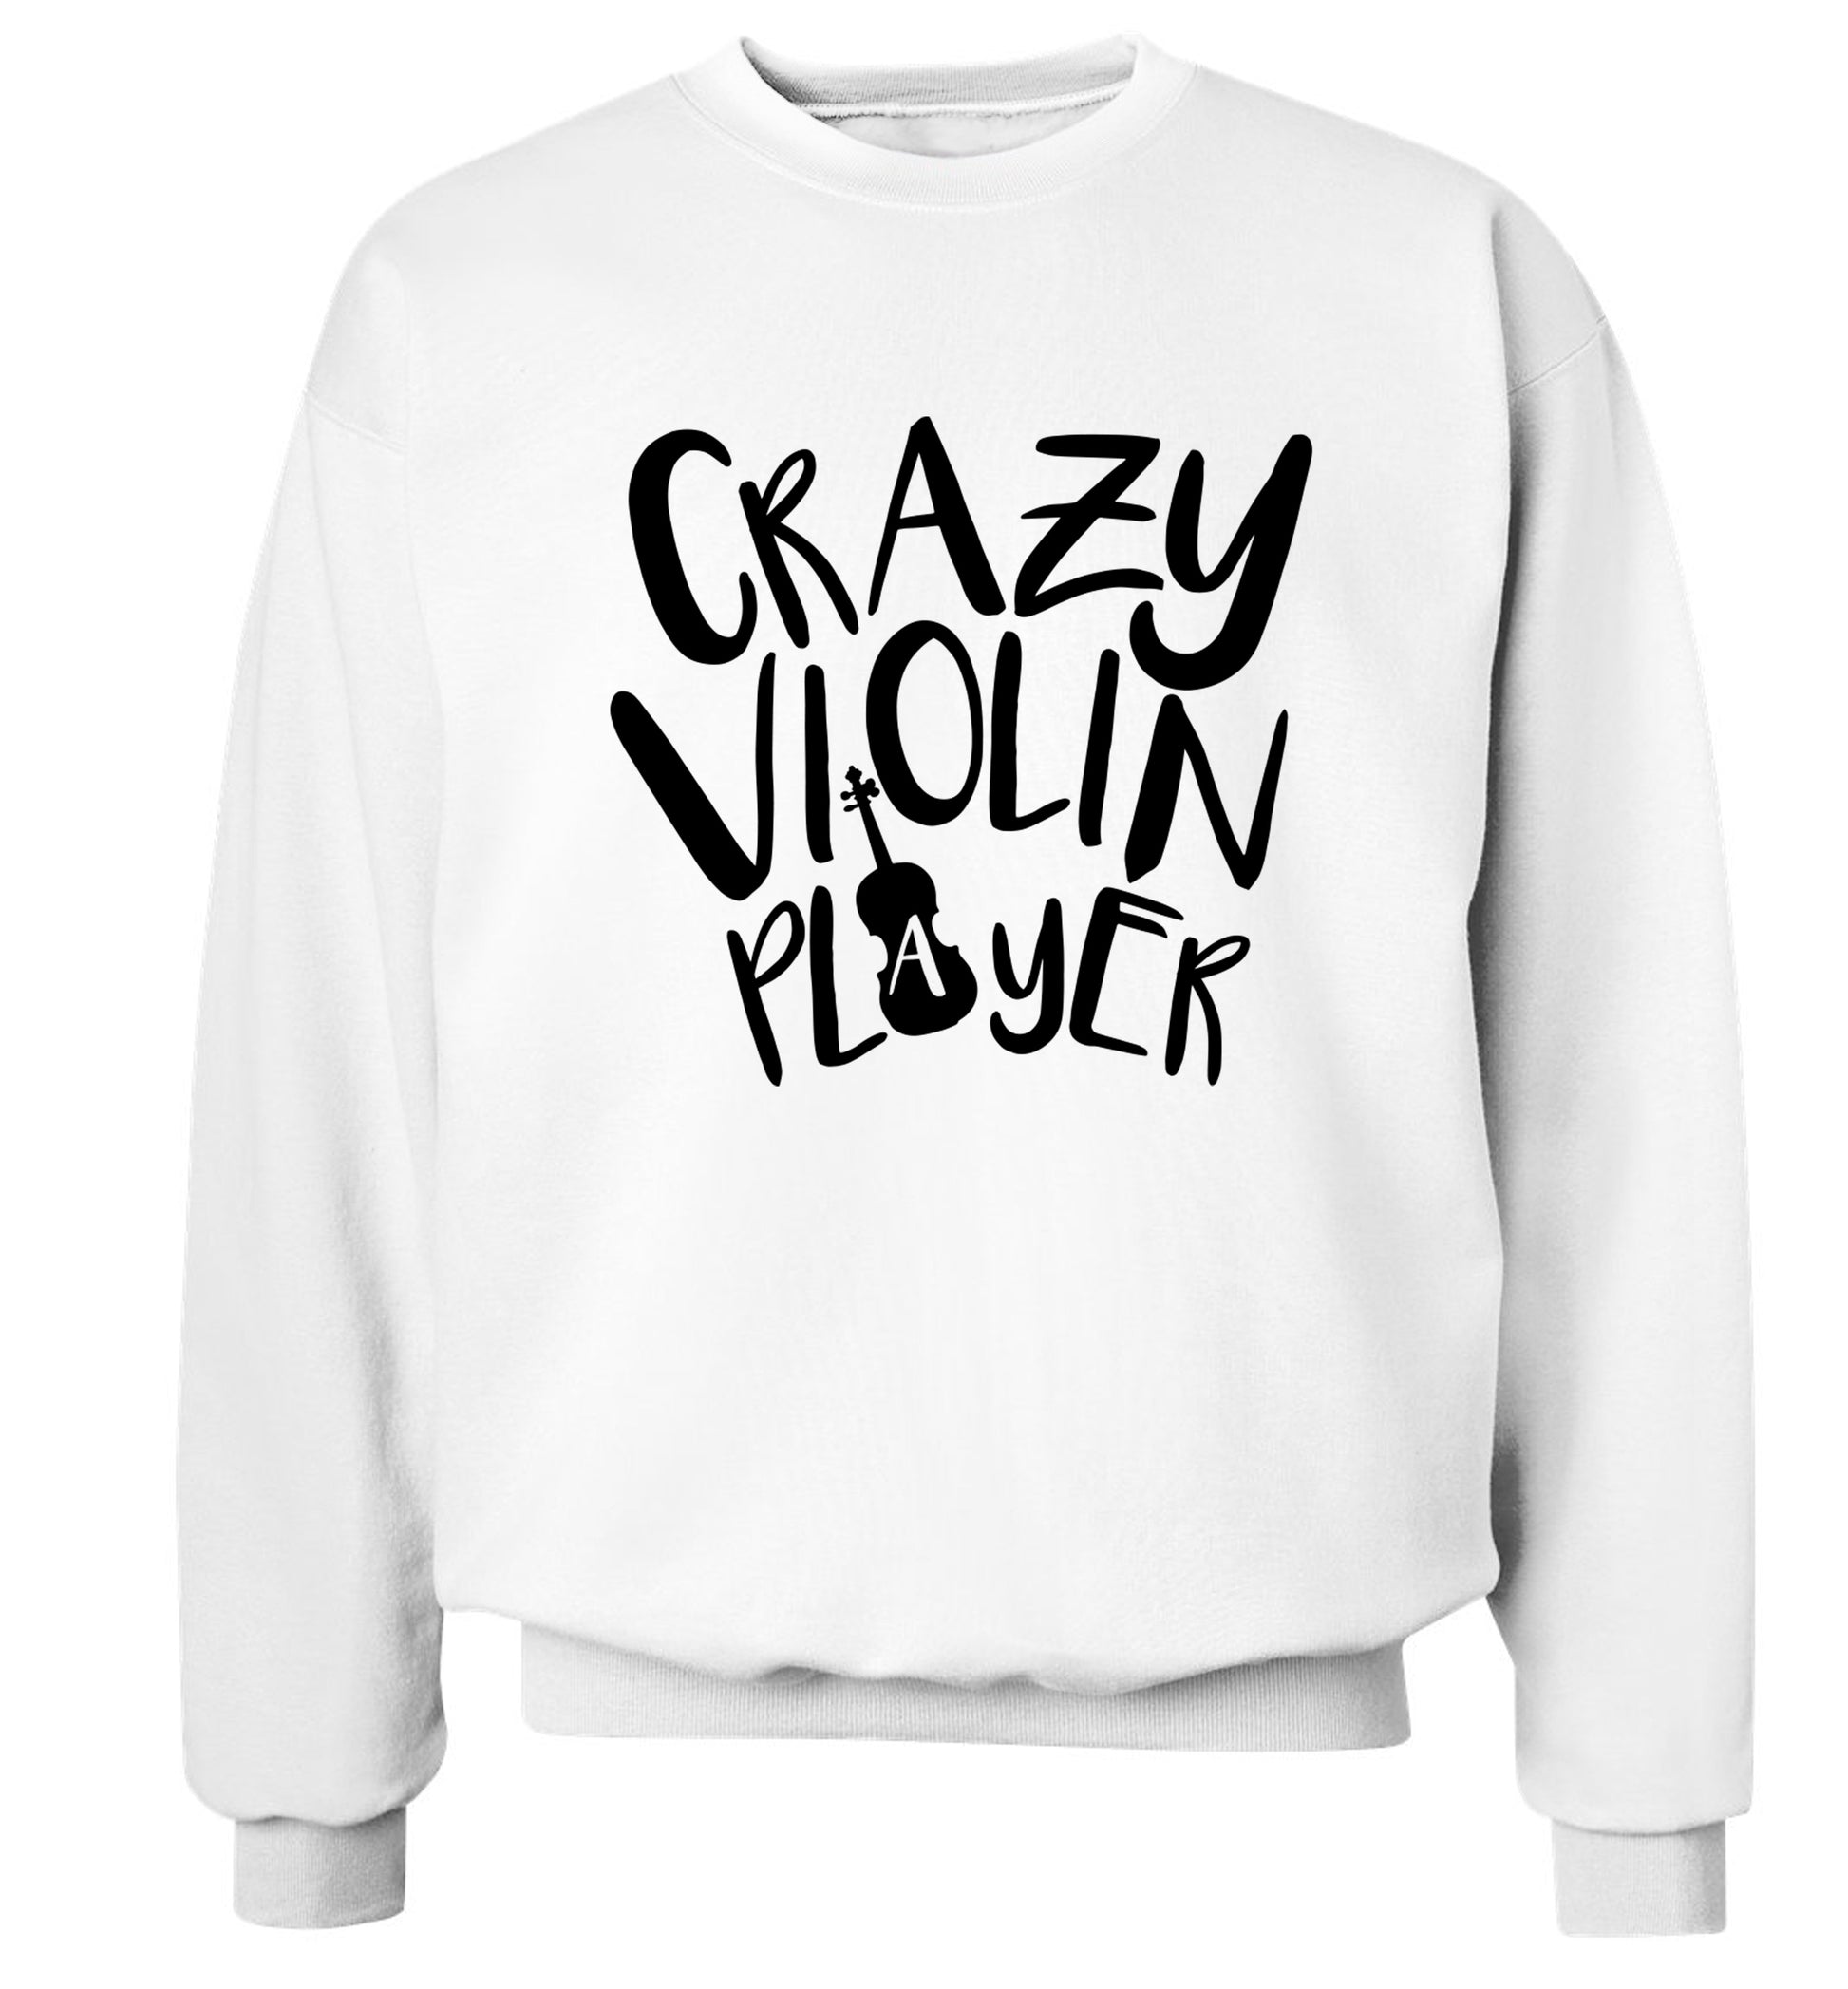 Crazy Violin Player Adult's unisex white Sweater 2XL